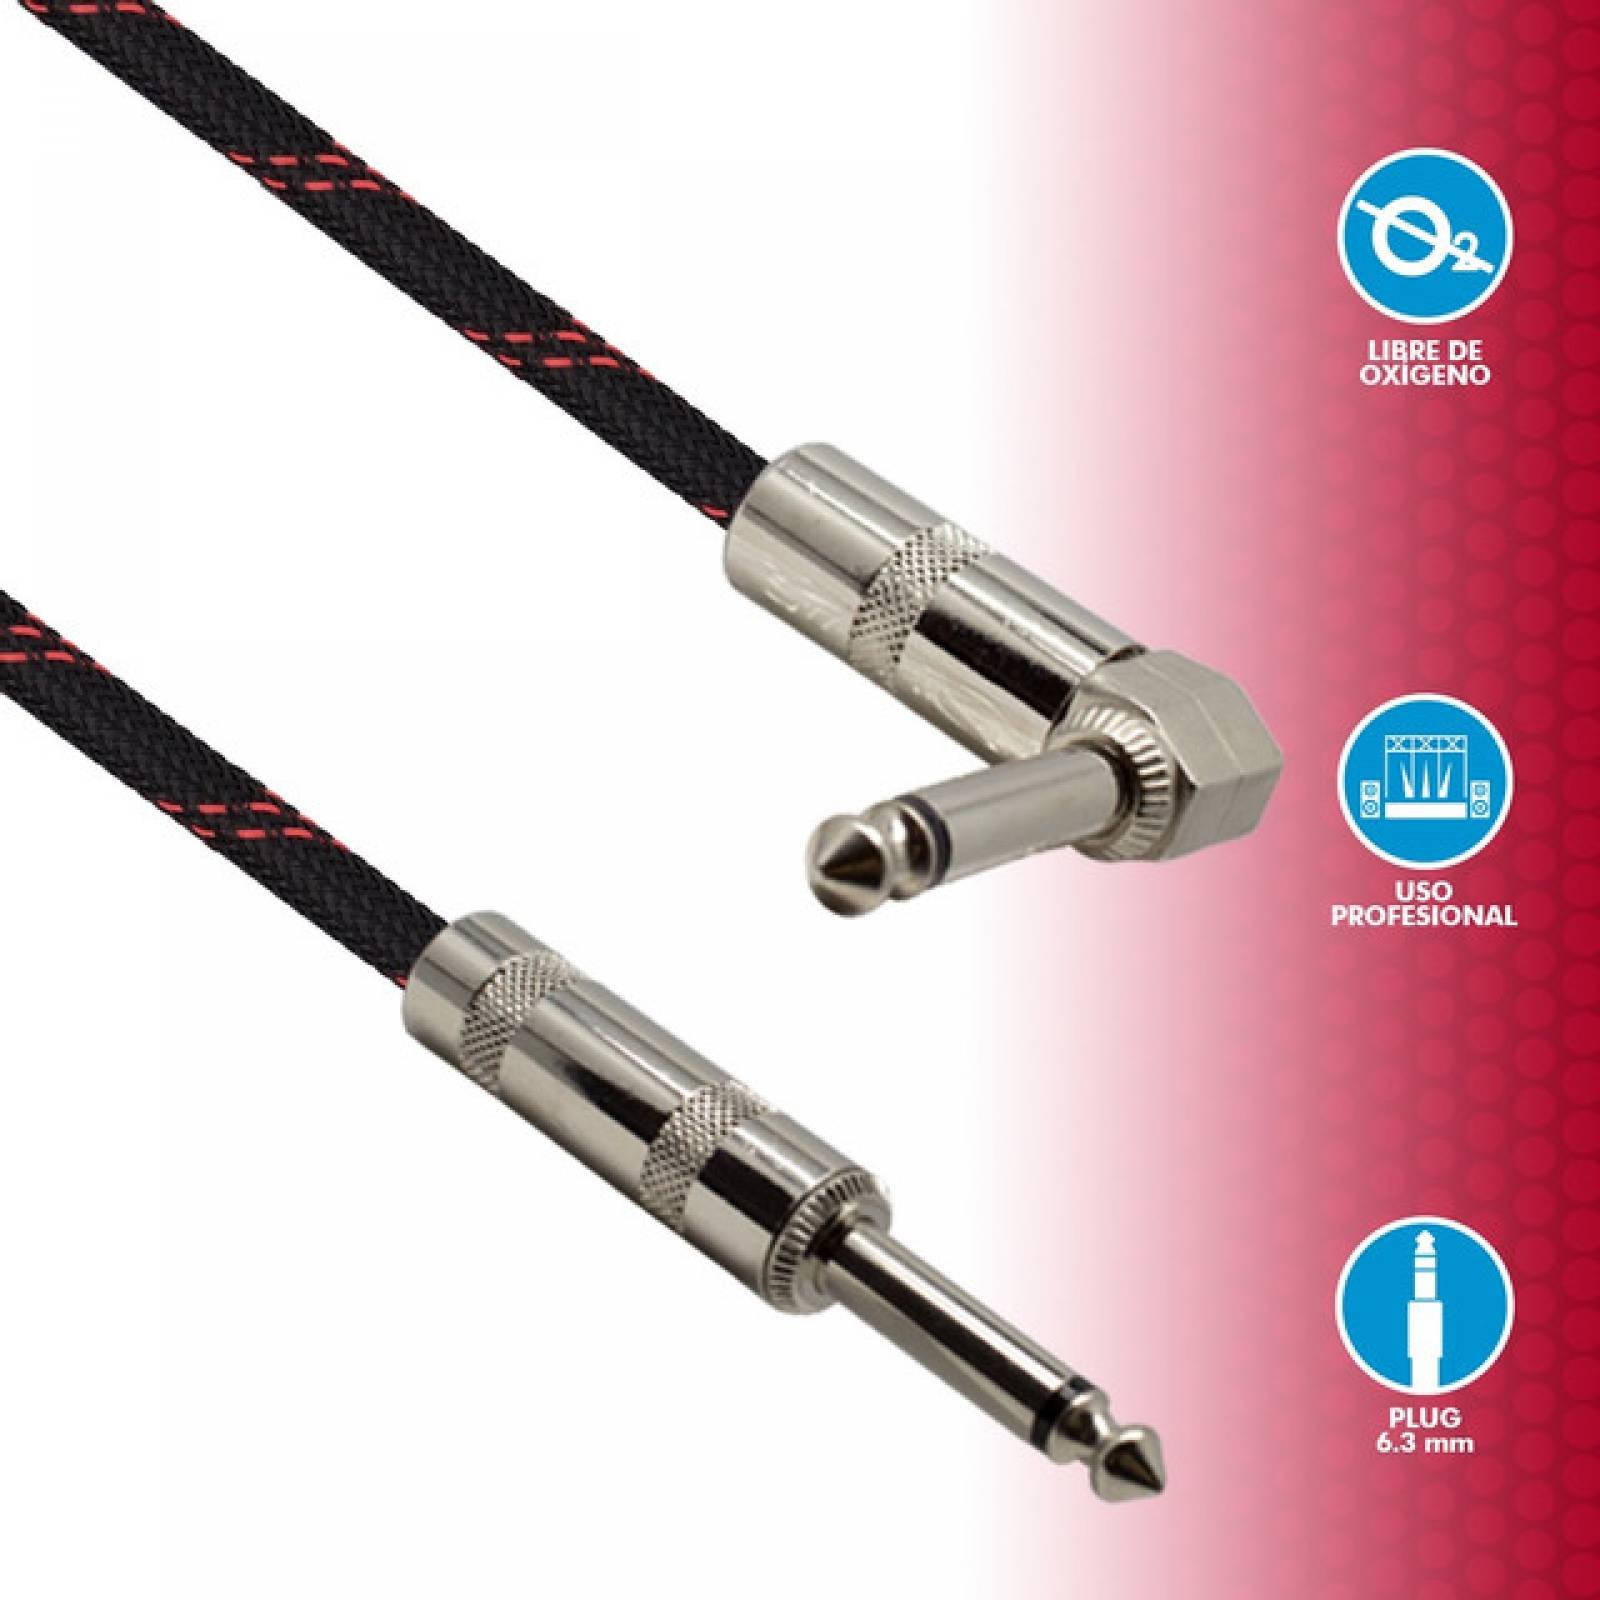 Cable Profesional Fussion Bc-302-30 De 6.3Mm 9 metros